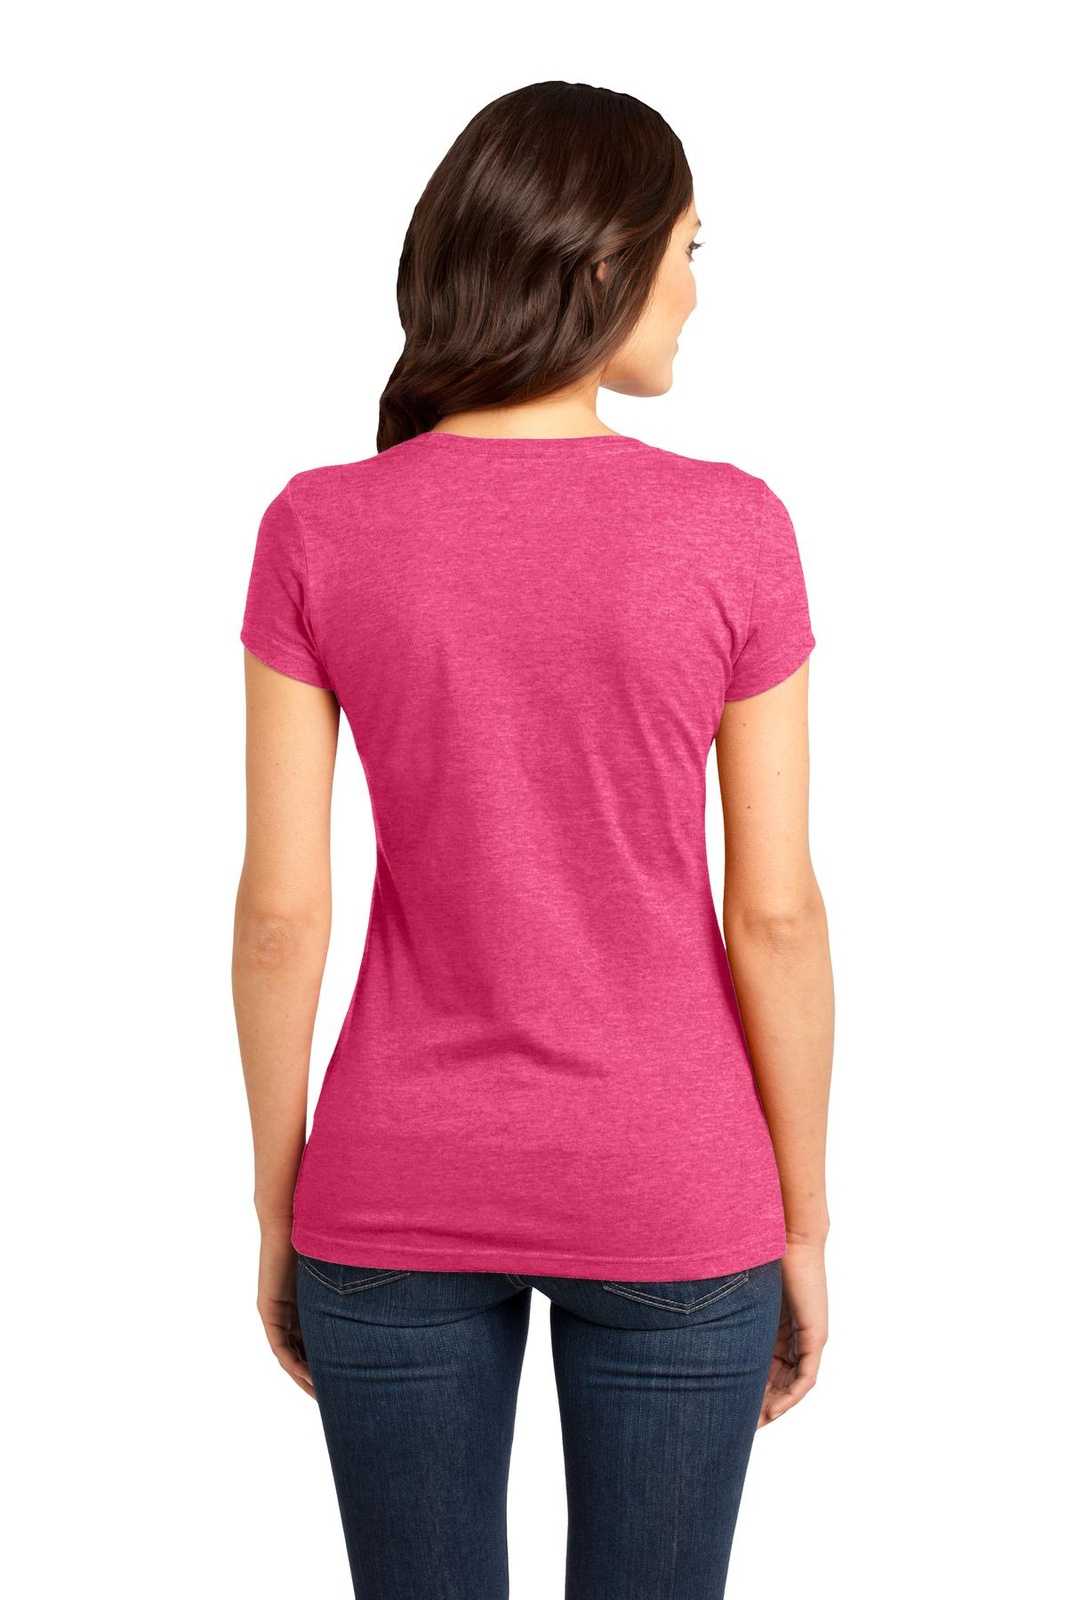 District DT6001 Women's Fitted Very Important Tee - Heathered Watermelon - HIT a Double - 1